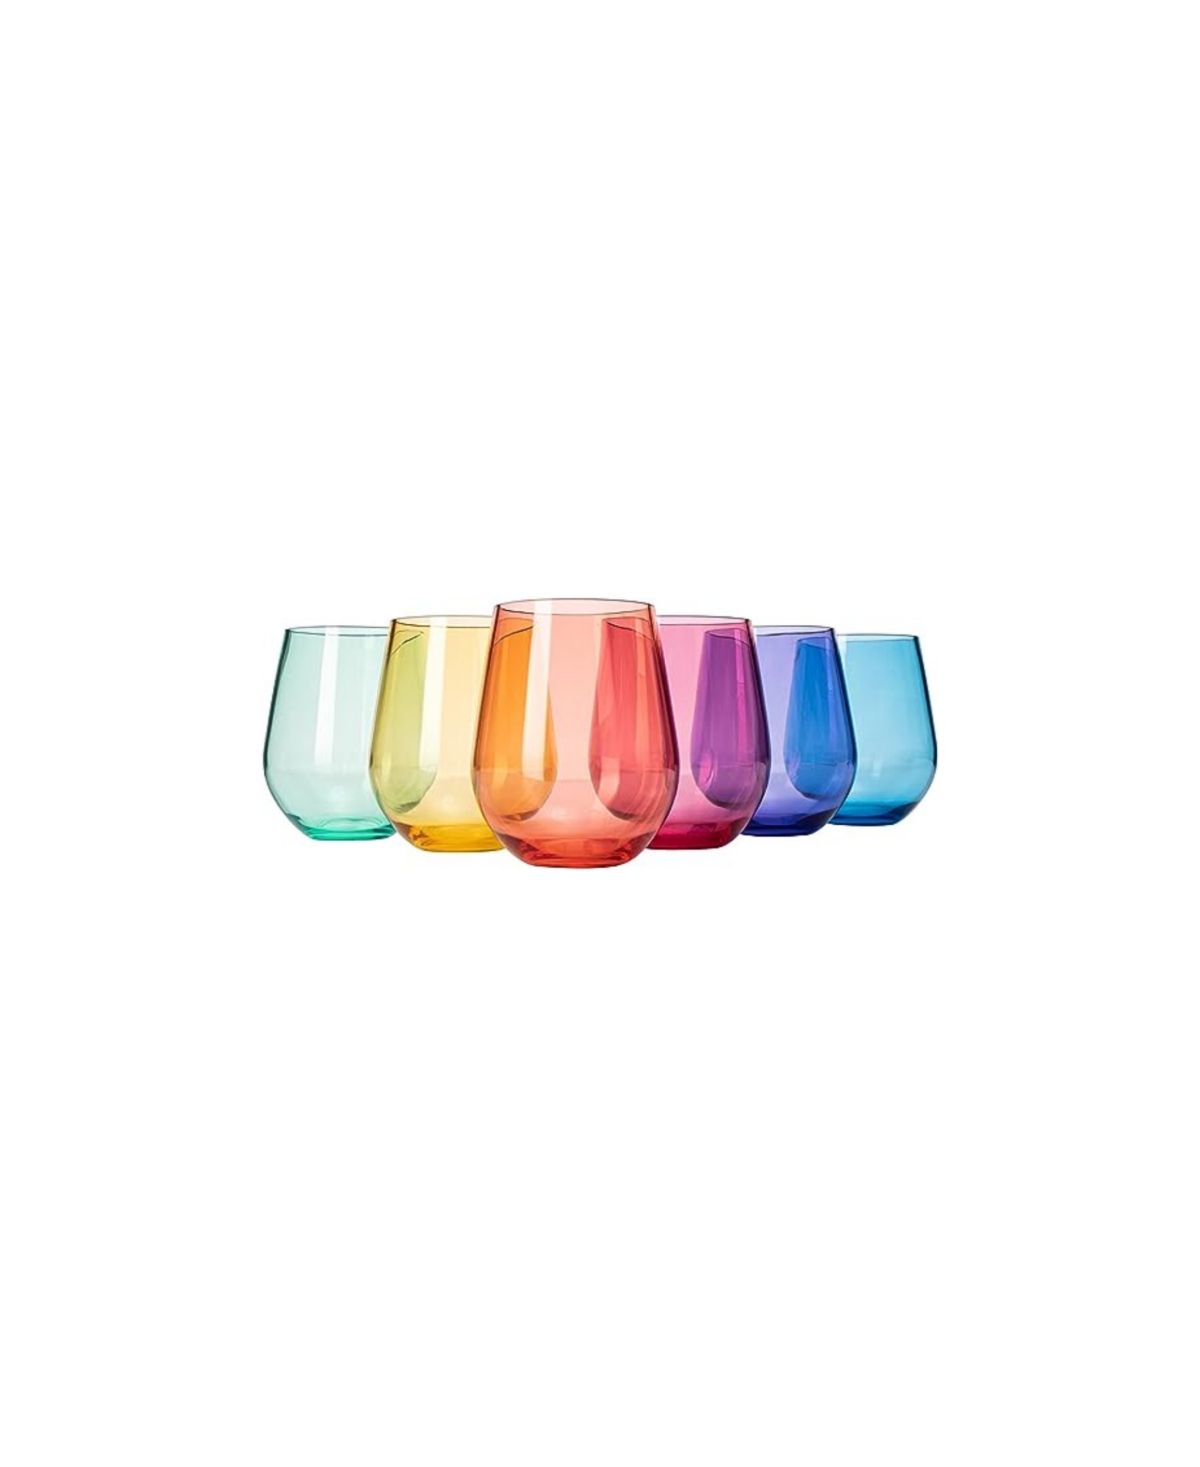 The Wine Savant Glass European Style Crystal, Stemless Wine Glasses Set Of 6 In Multicolor